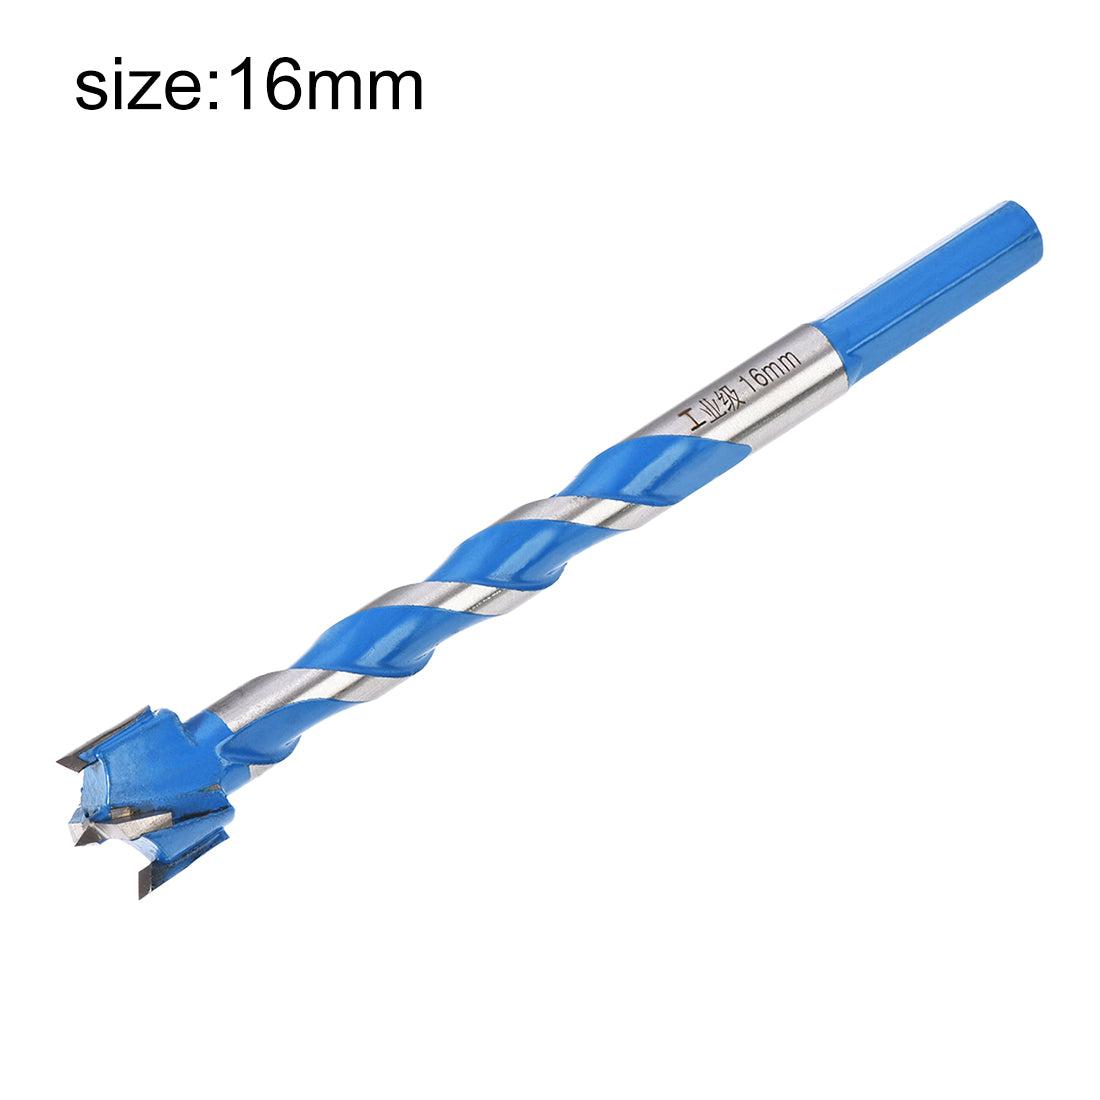 uxcell Uxcell Forstner Wood Boring Drill Bit 16mm Dia. Hole Saw Carbide Alloy Steel Tip Hex Shank Cutting for Hinge Plywood Wood Tool Blue